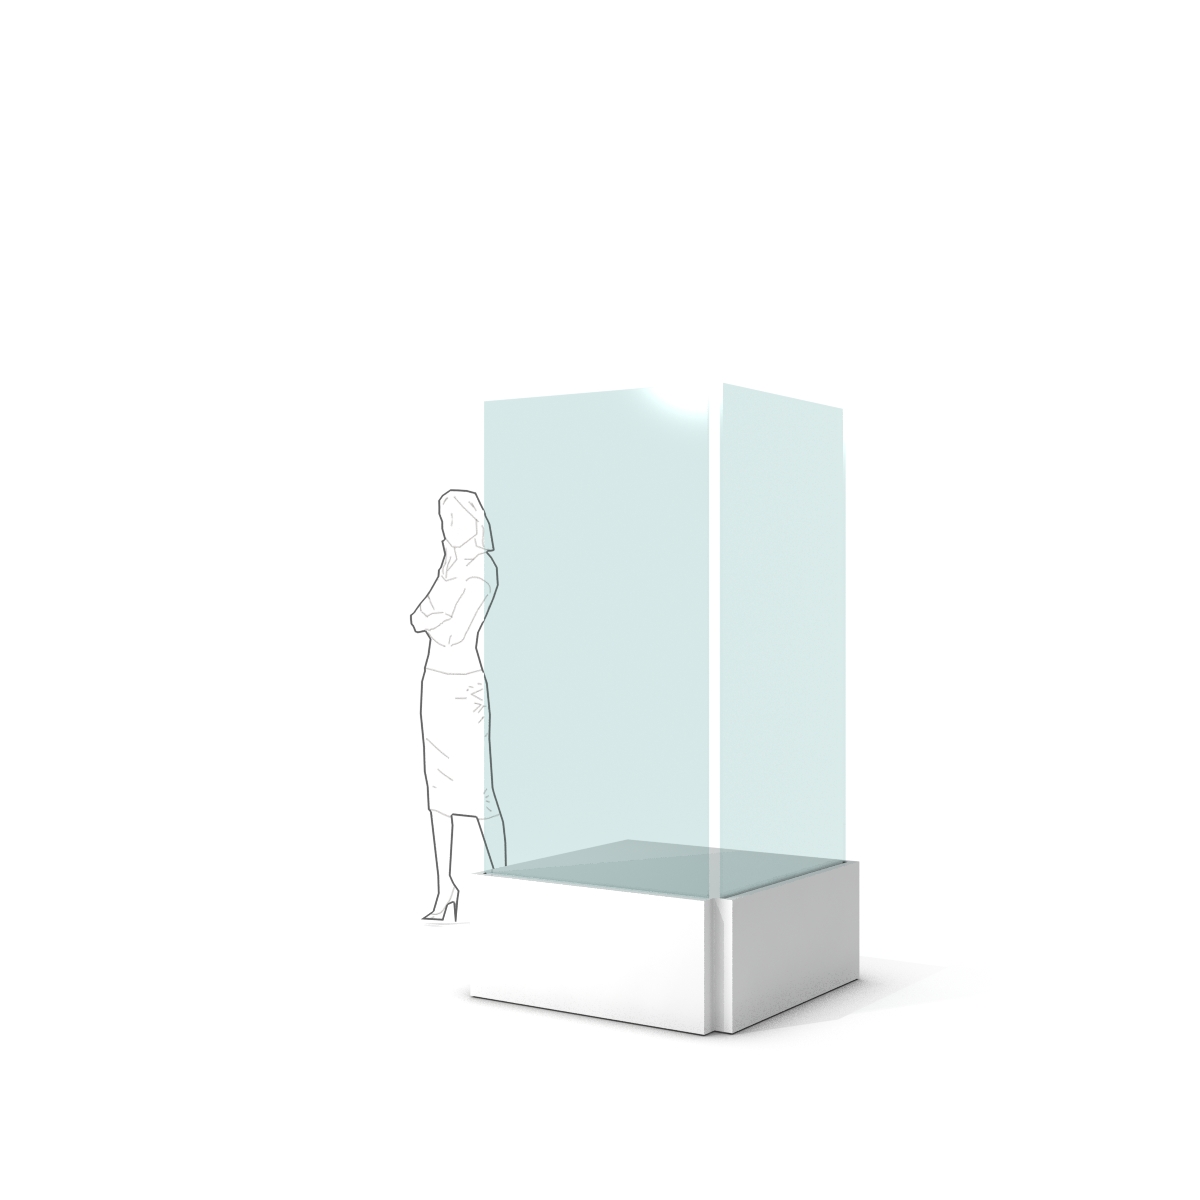 Freestanding corner glass partition on a base